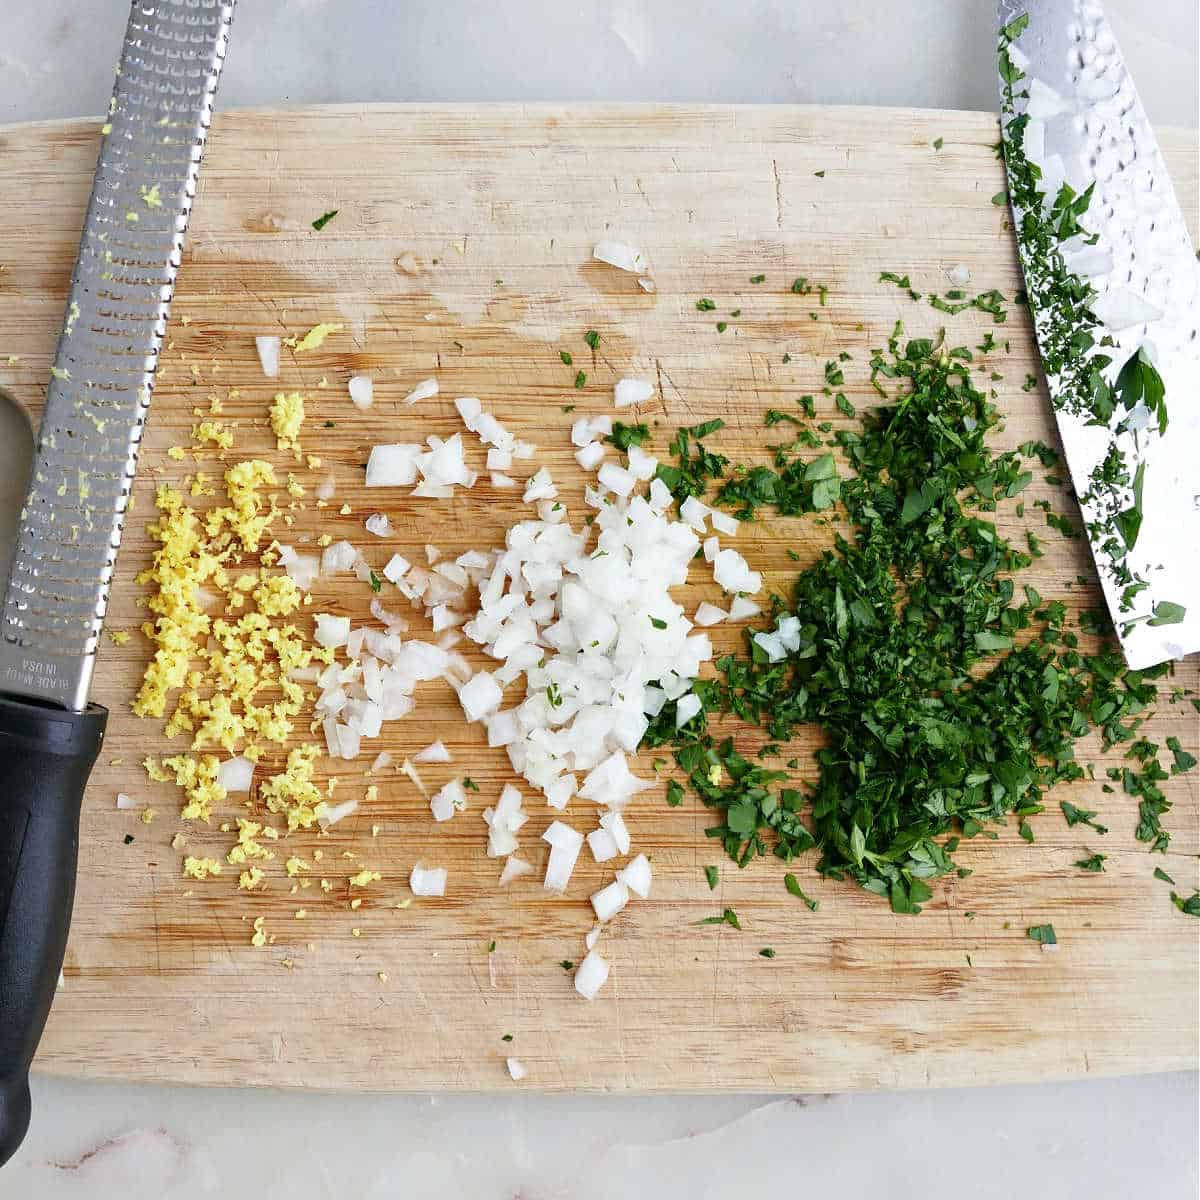 Chopped ginger, onion, and parsley on a cutting board.